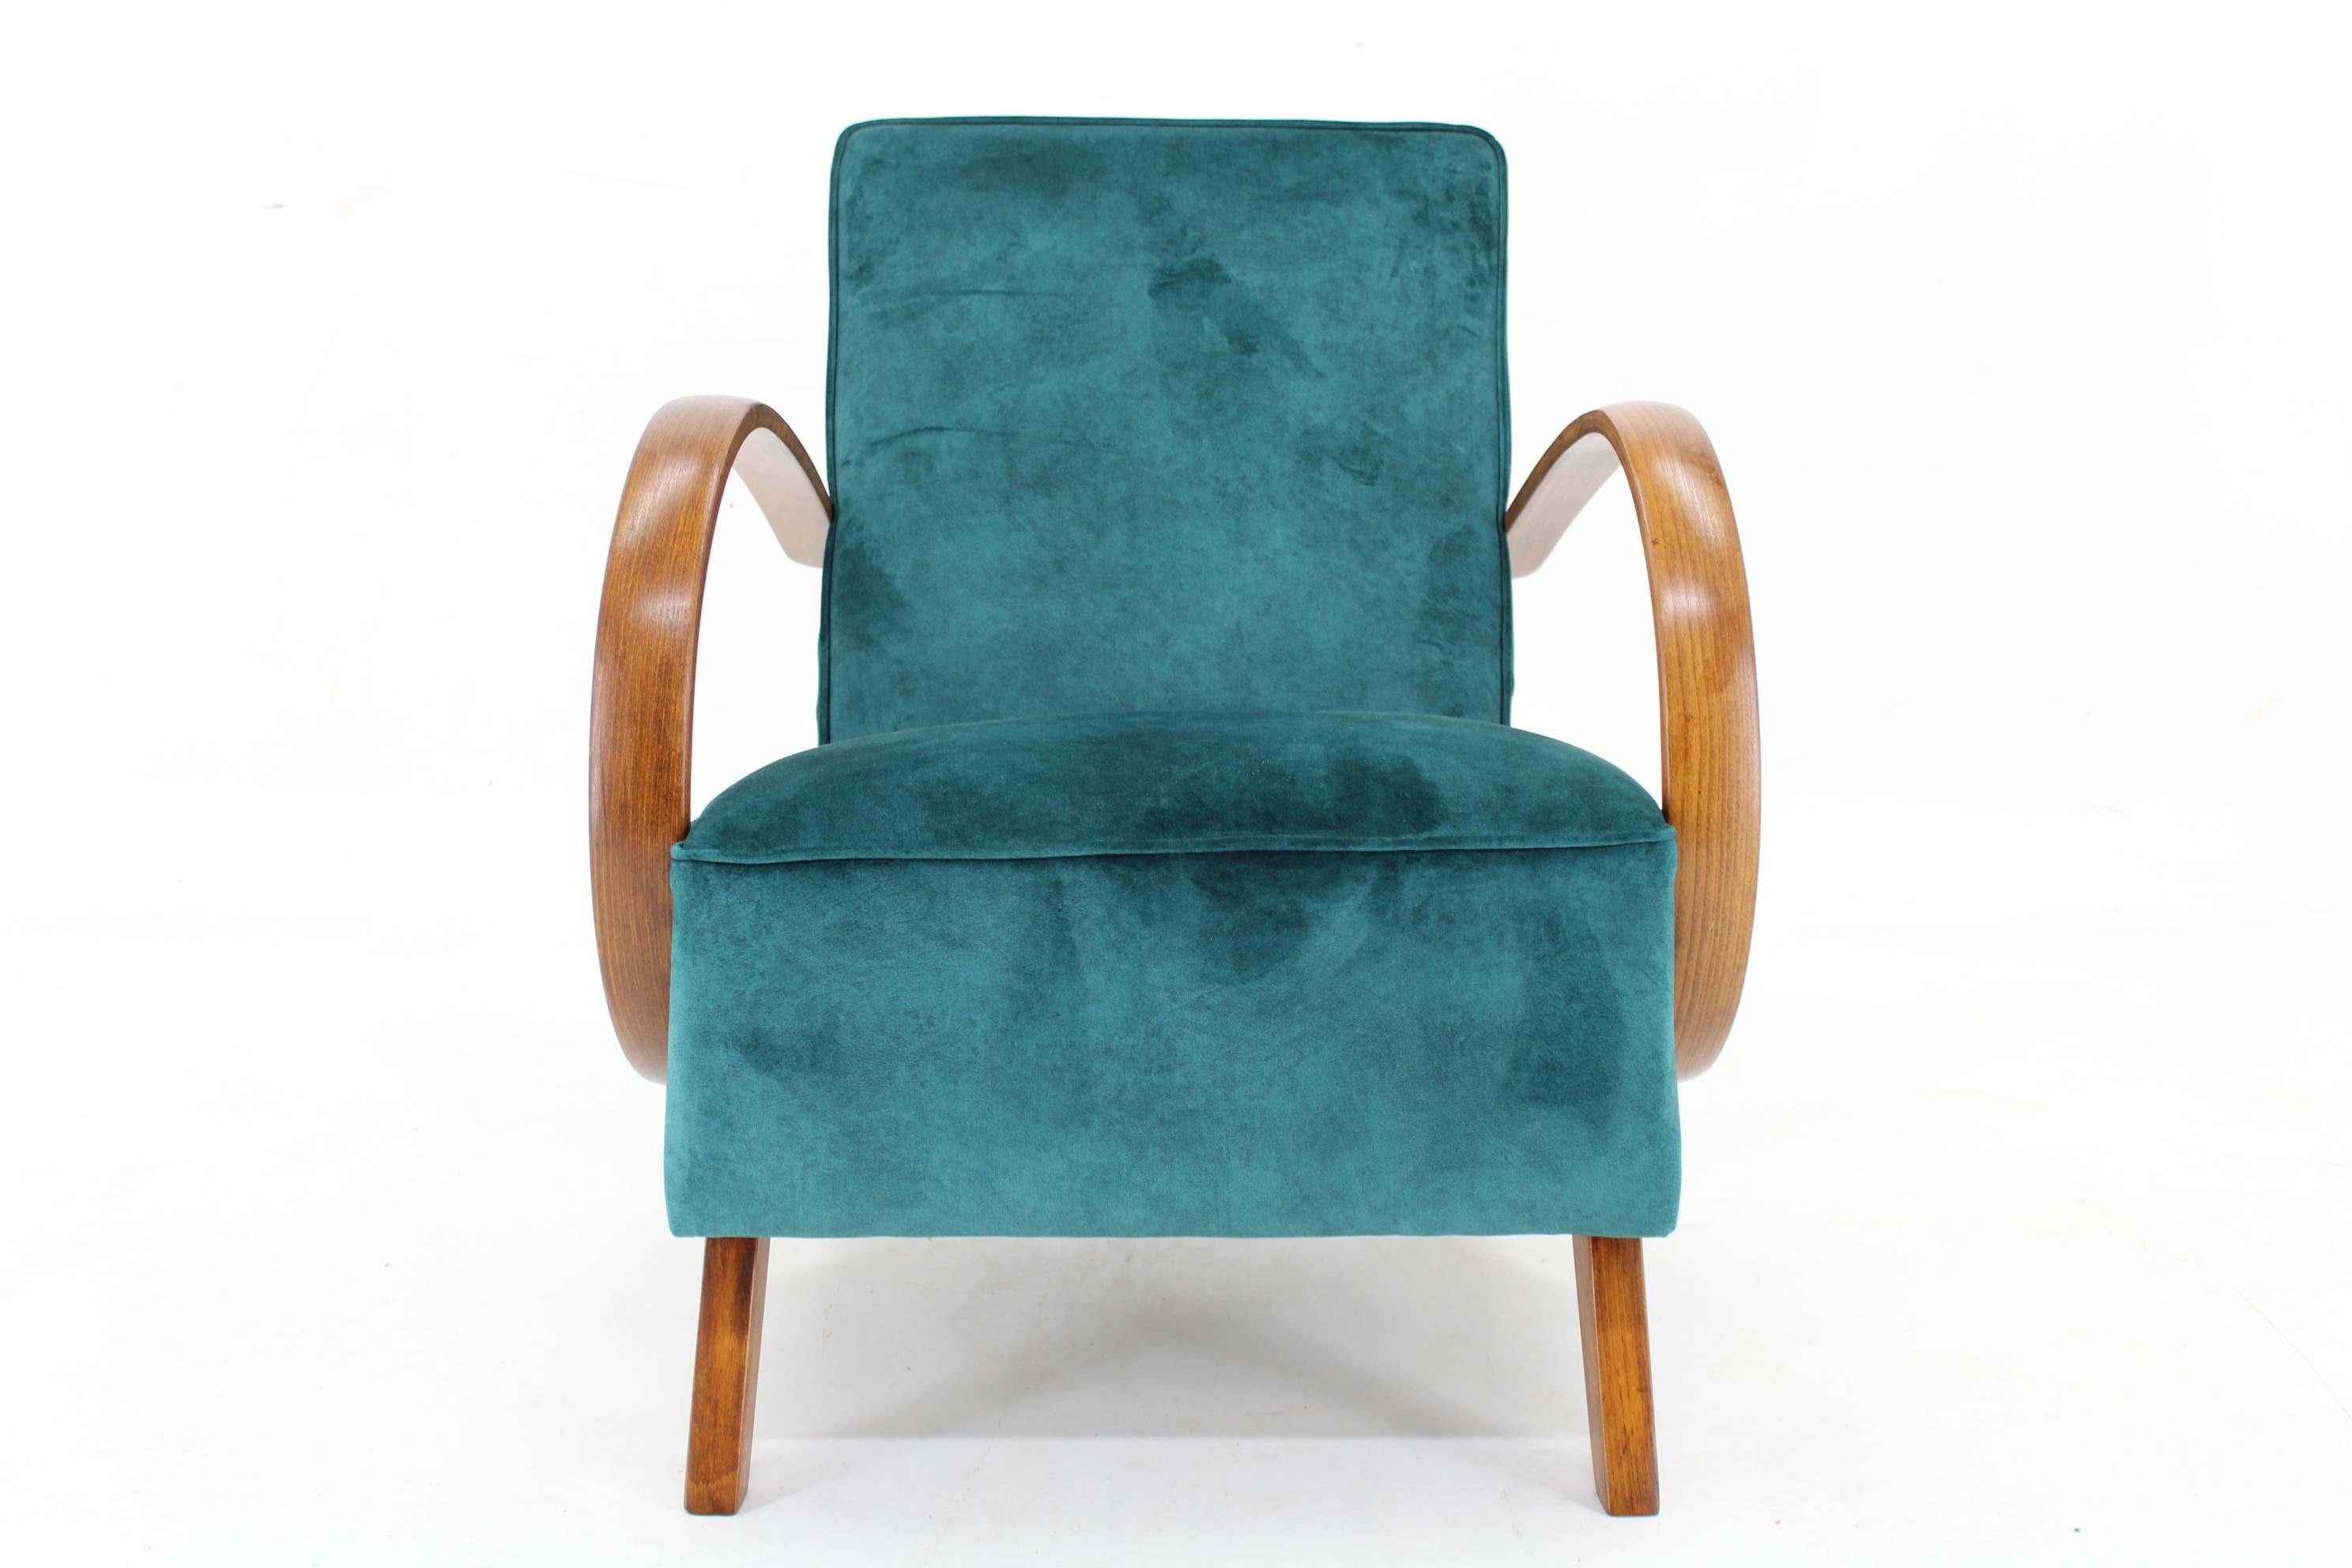  - Newly upholstered 
- The wooden parts have been refurbished
 - The seat height is 41 cm 